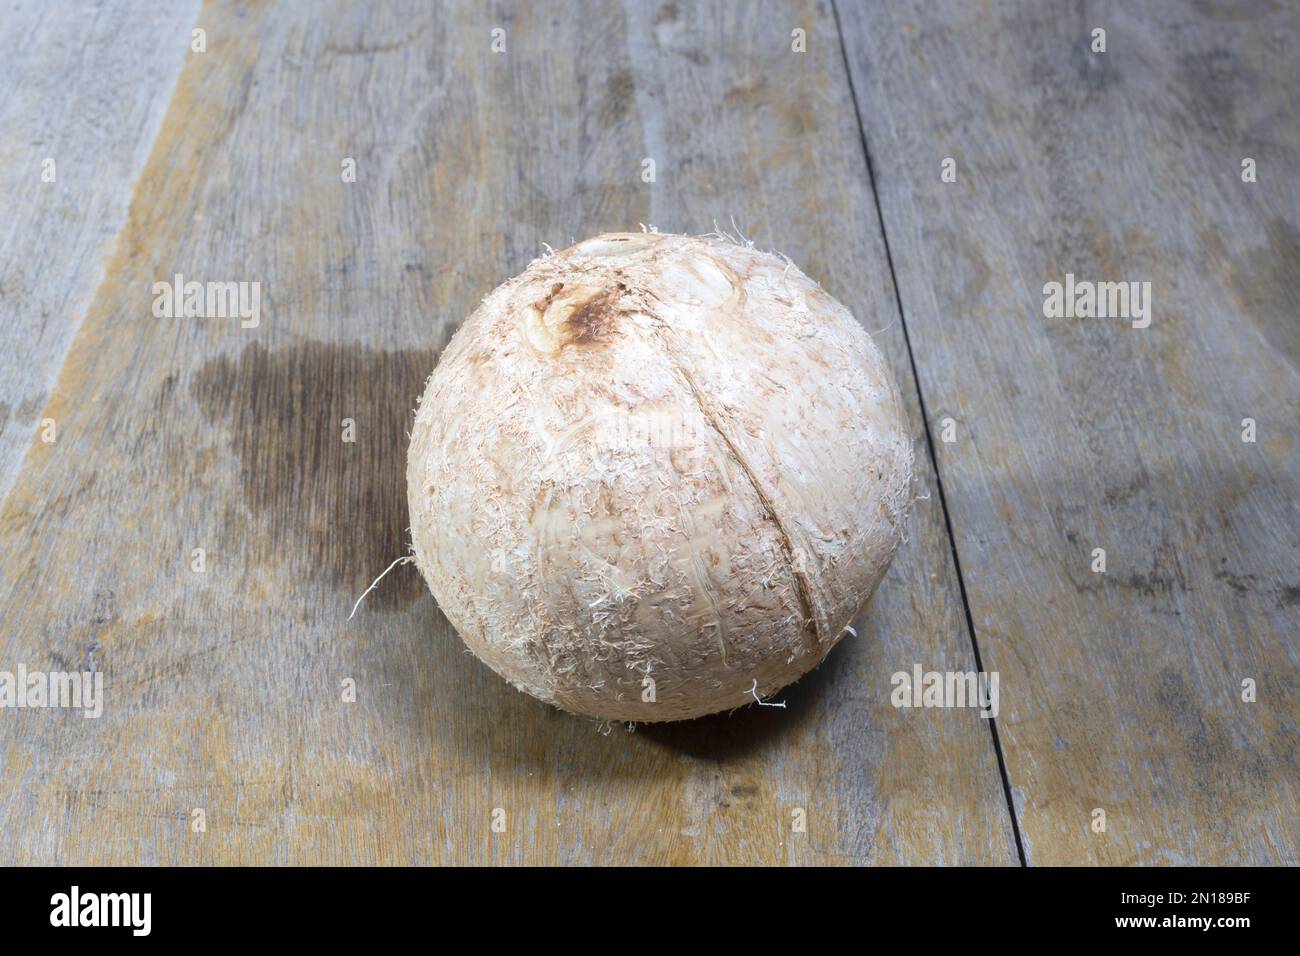 Fresh raw single coconut closeup isolated on wooden background Stock Photo